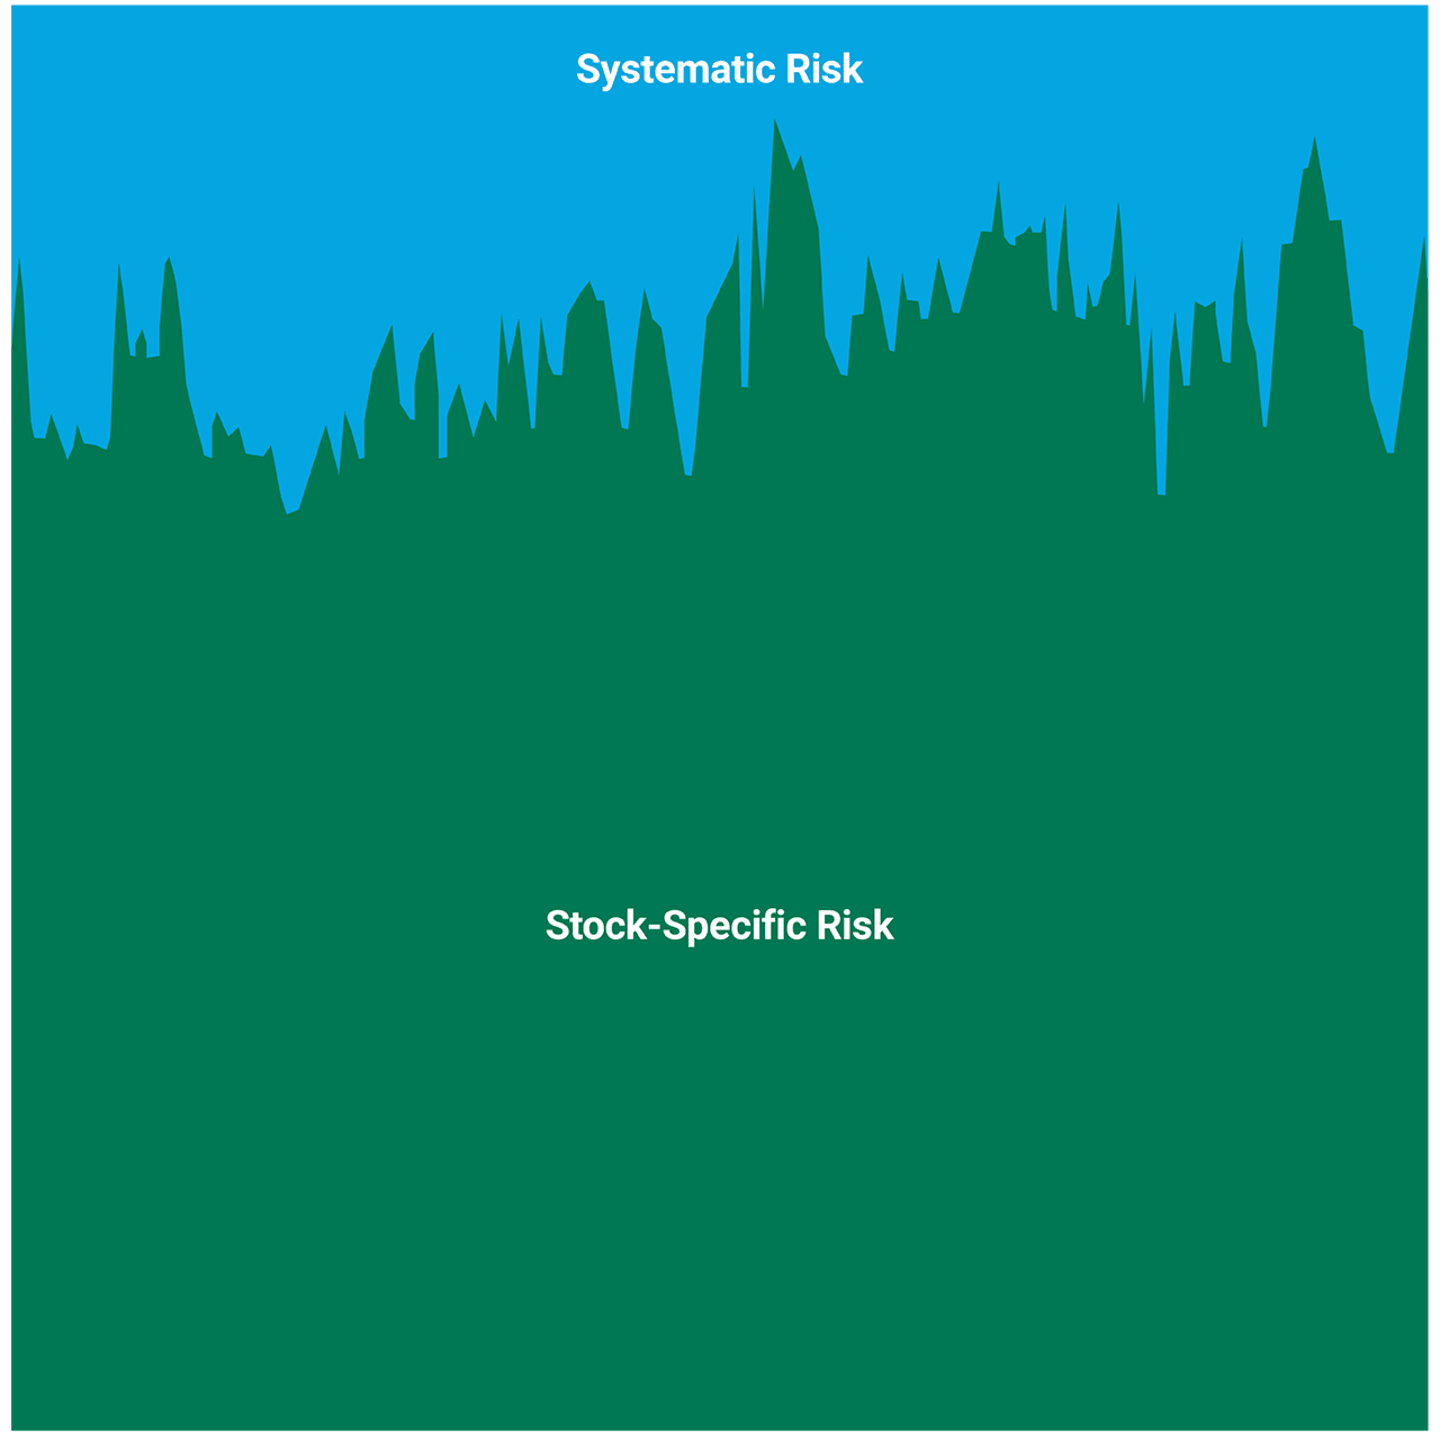 A hypothetical view of the variance between portfolio systematic and stock-specific risk.